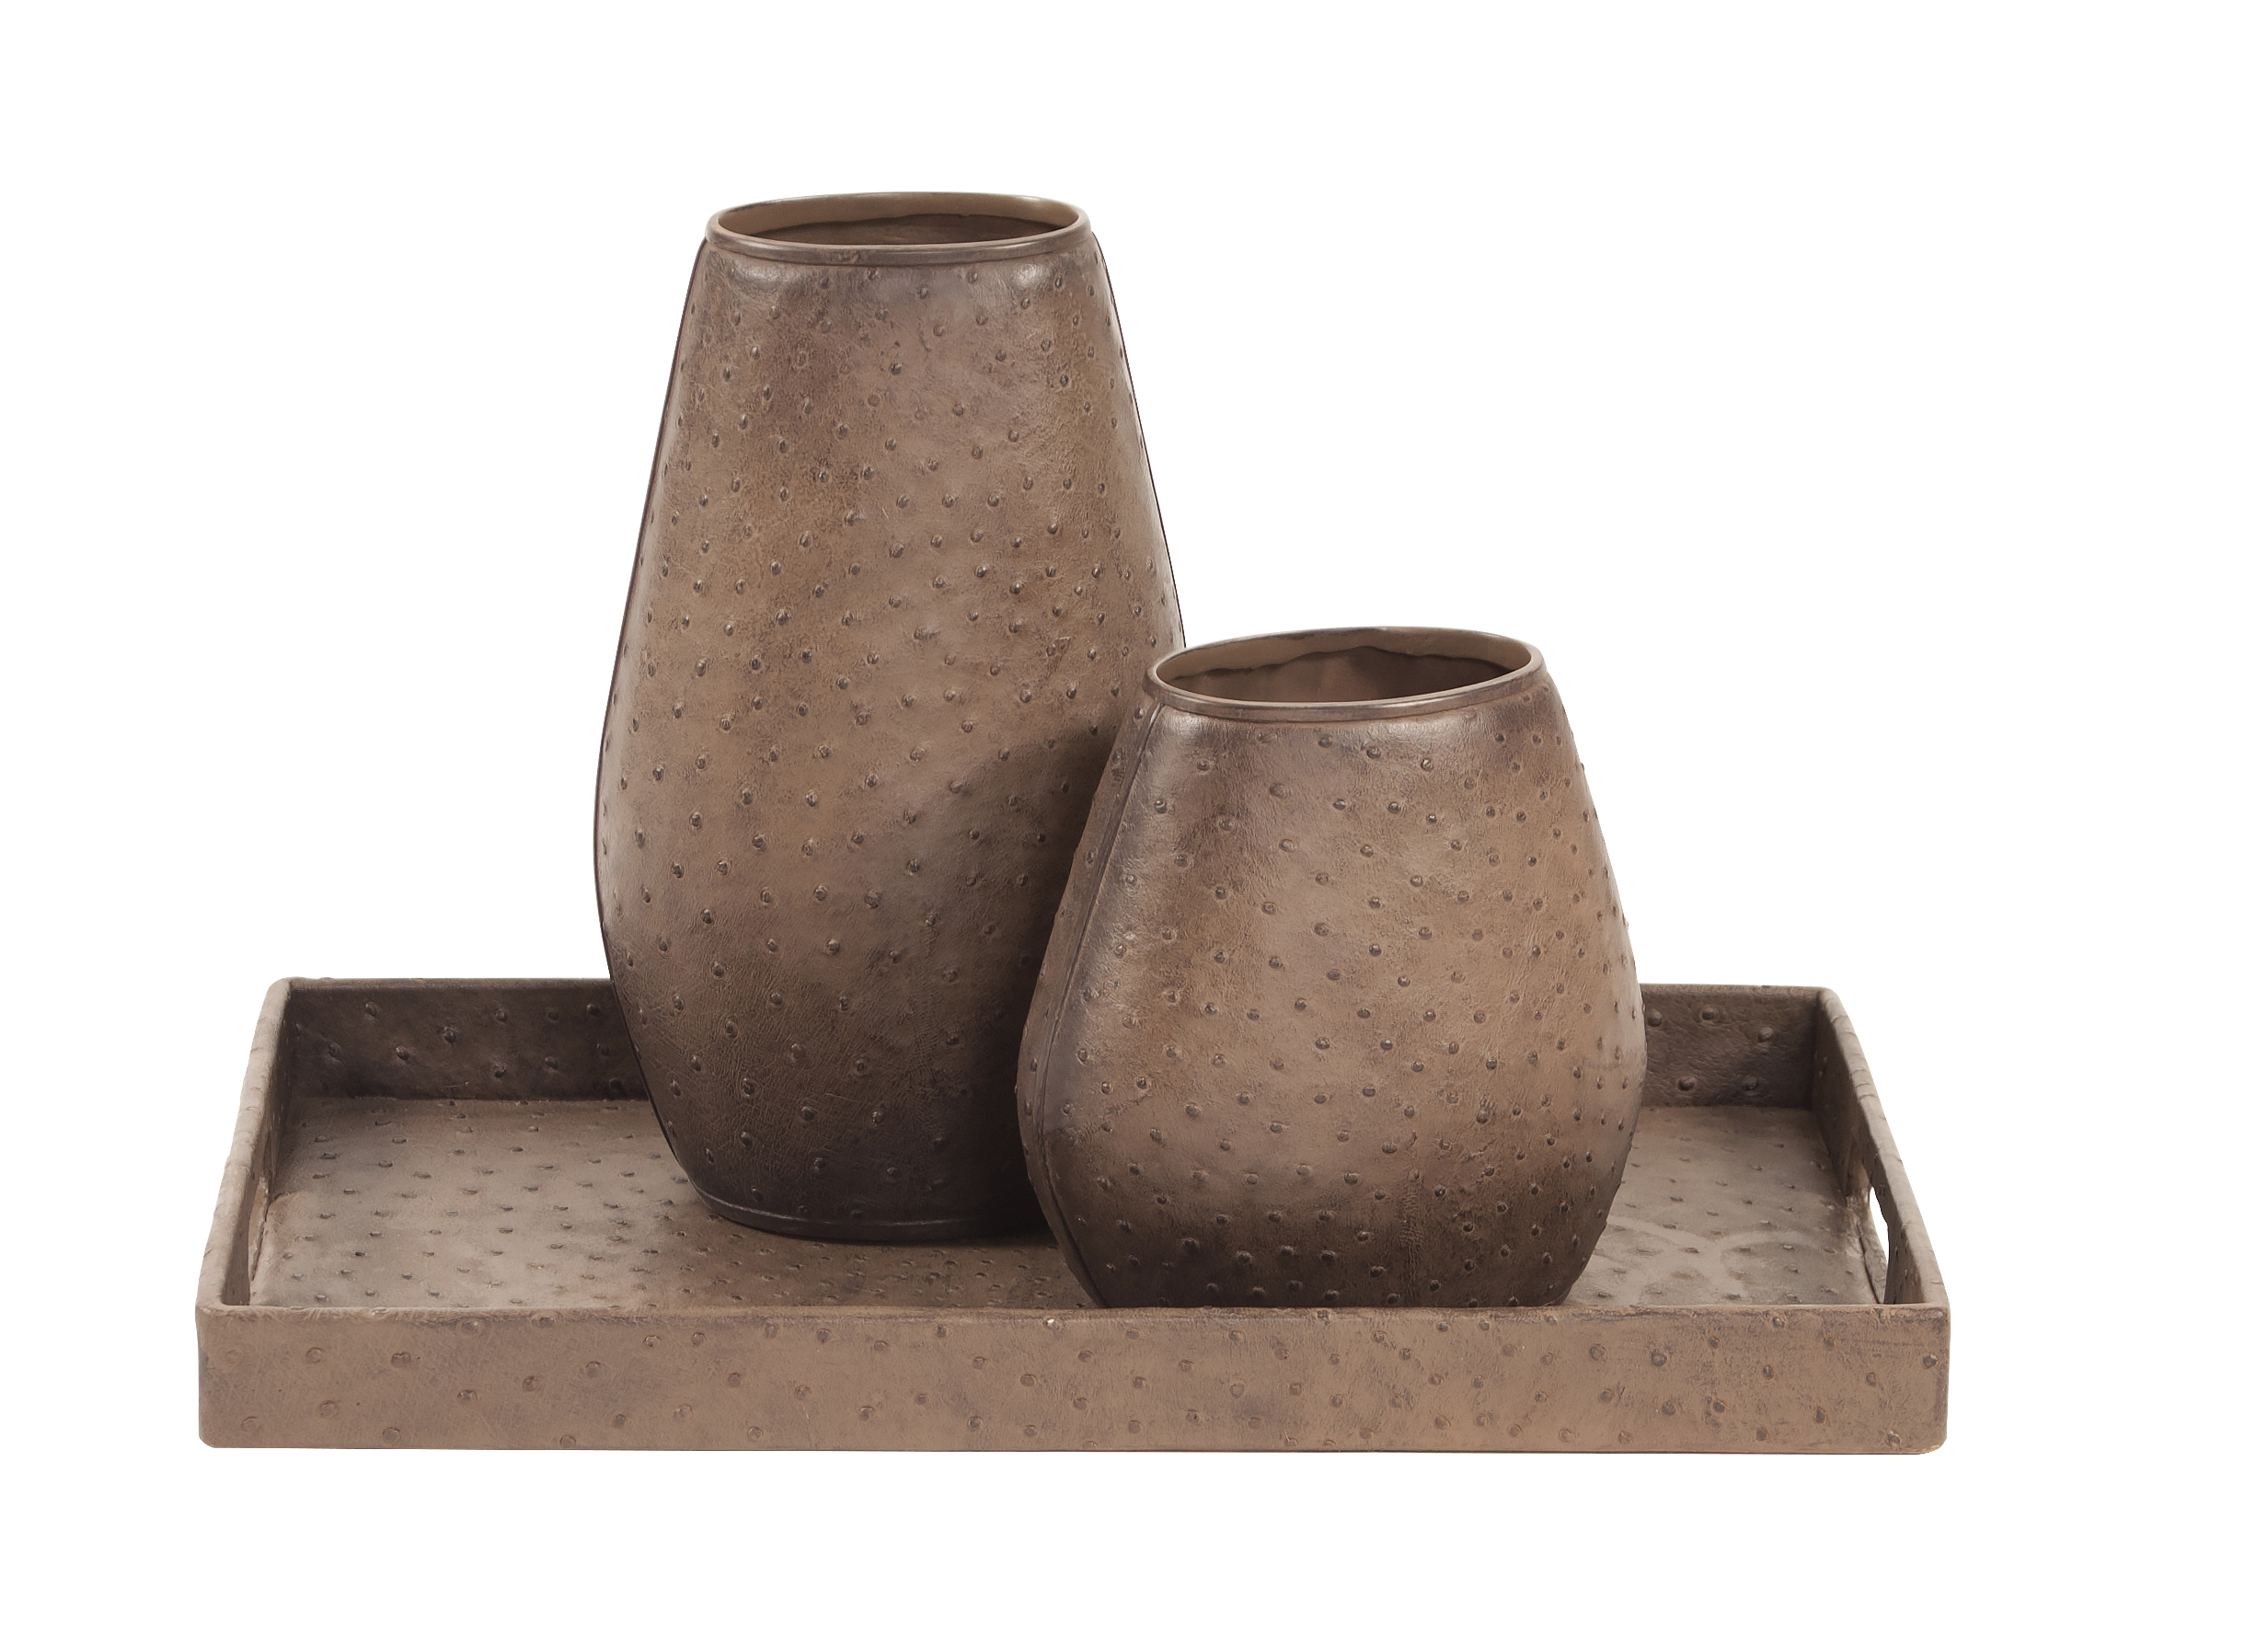 Walnut Brown vases and tray in faux leather from Howard Elliott